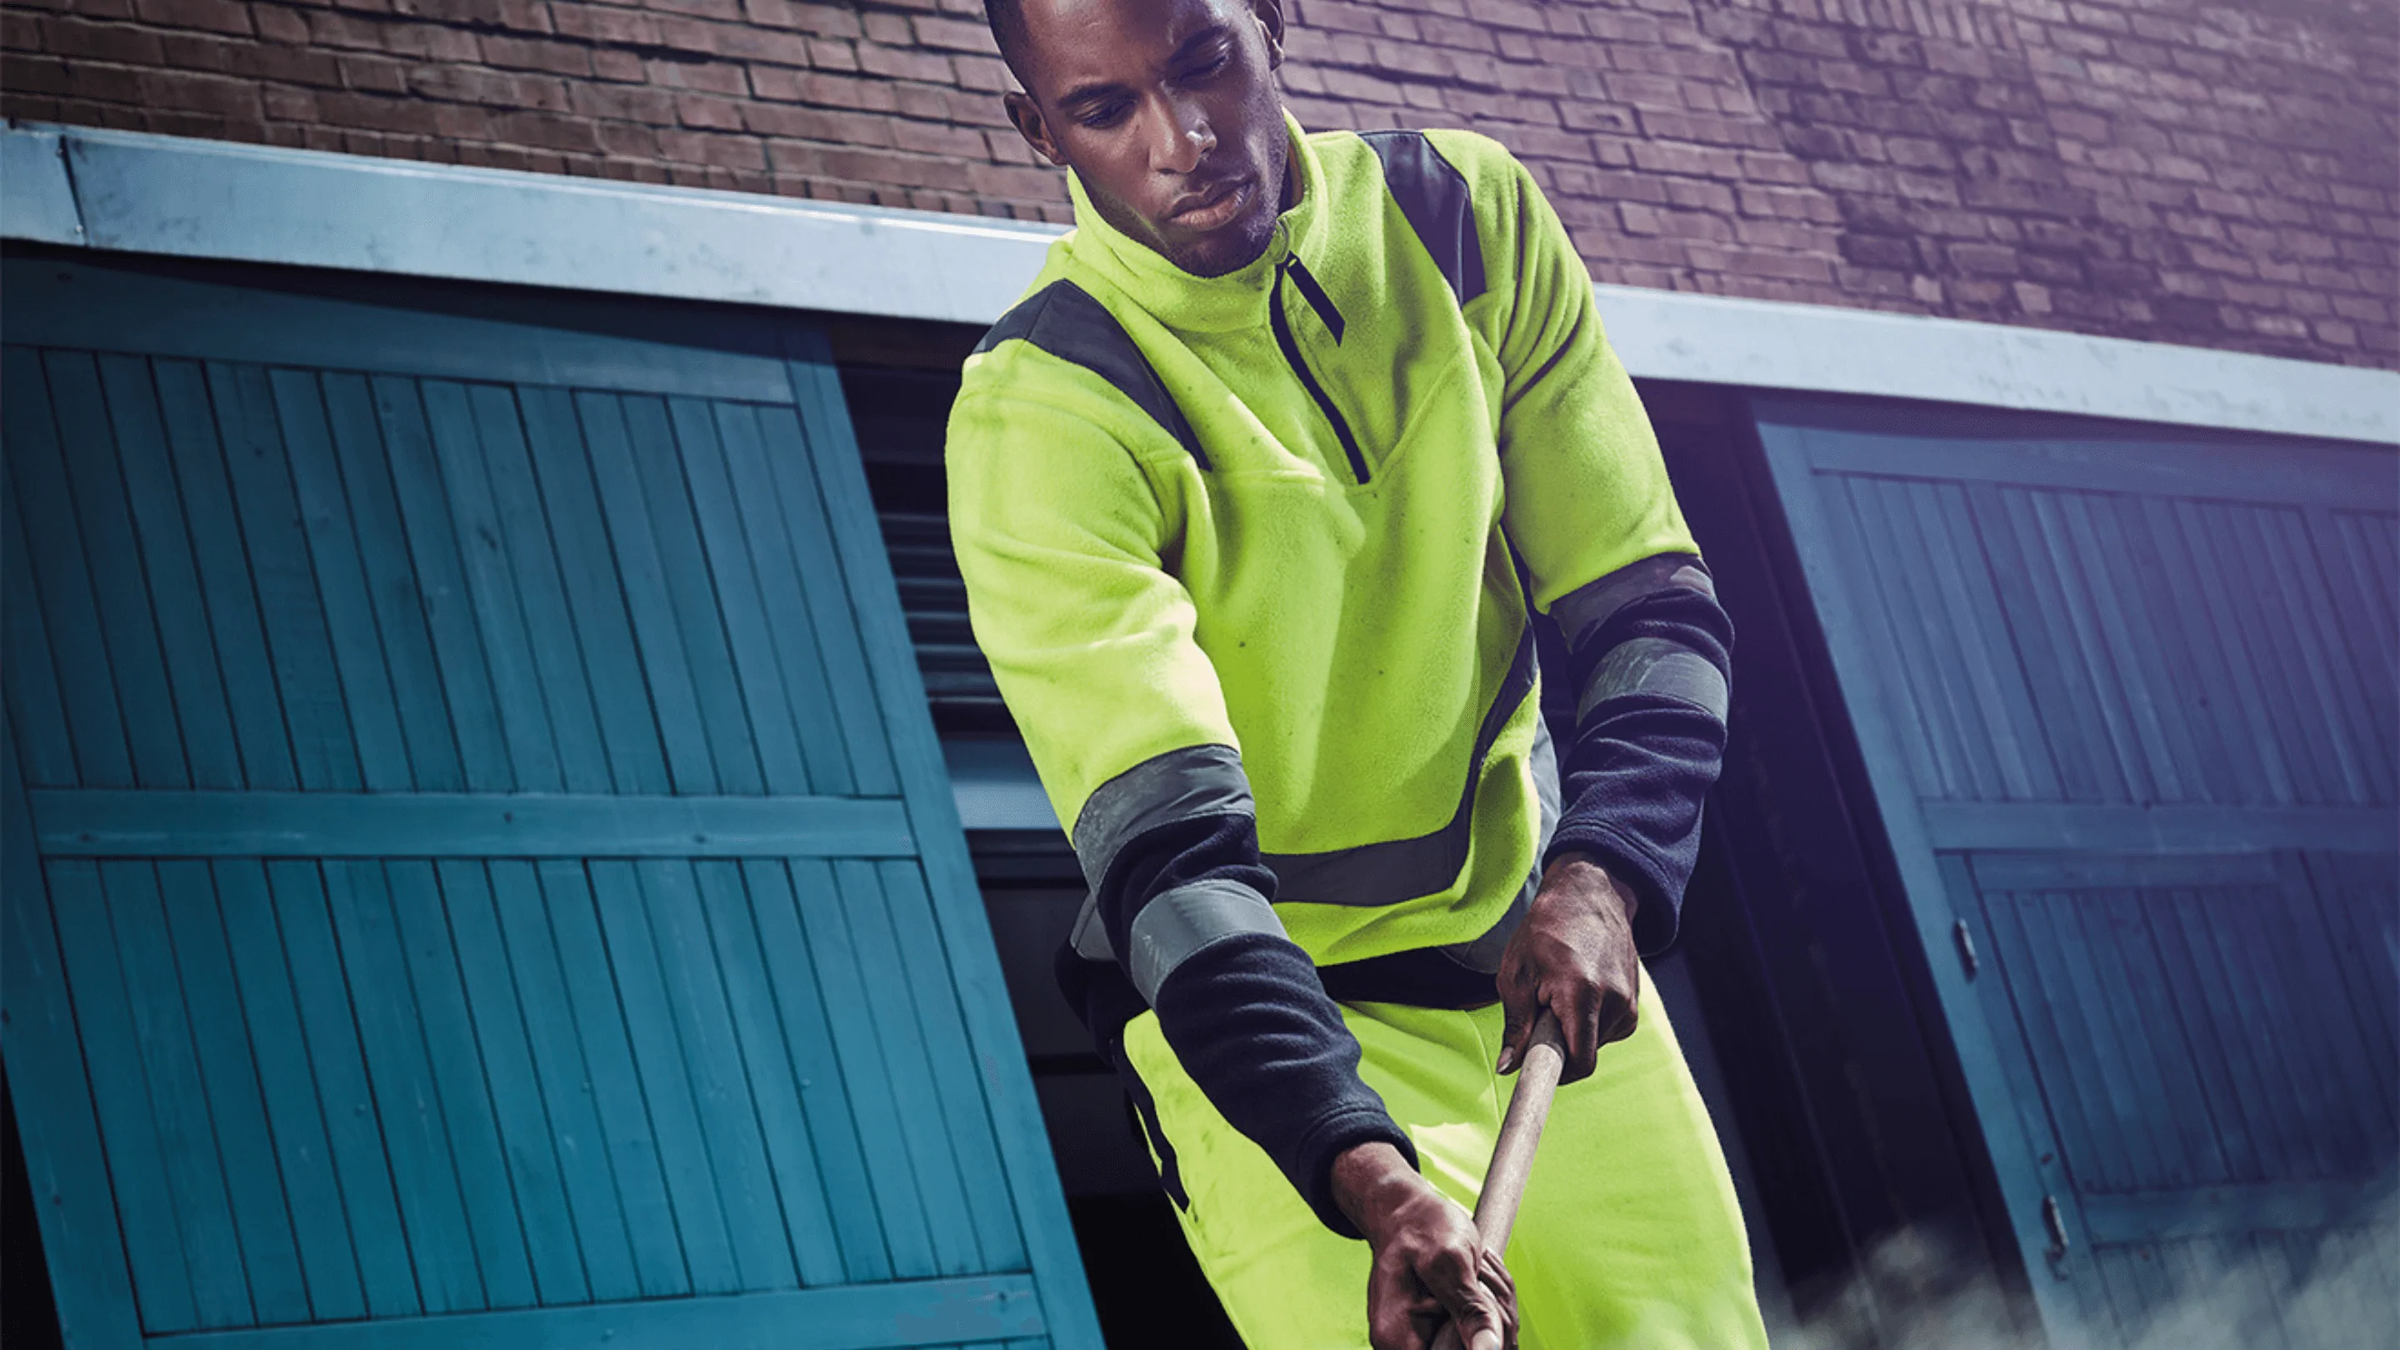 An image of Hi Vis Clothing being modelled